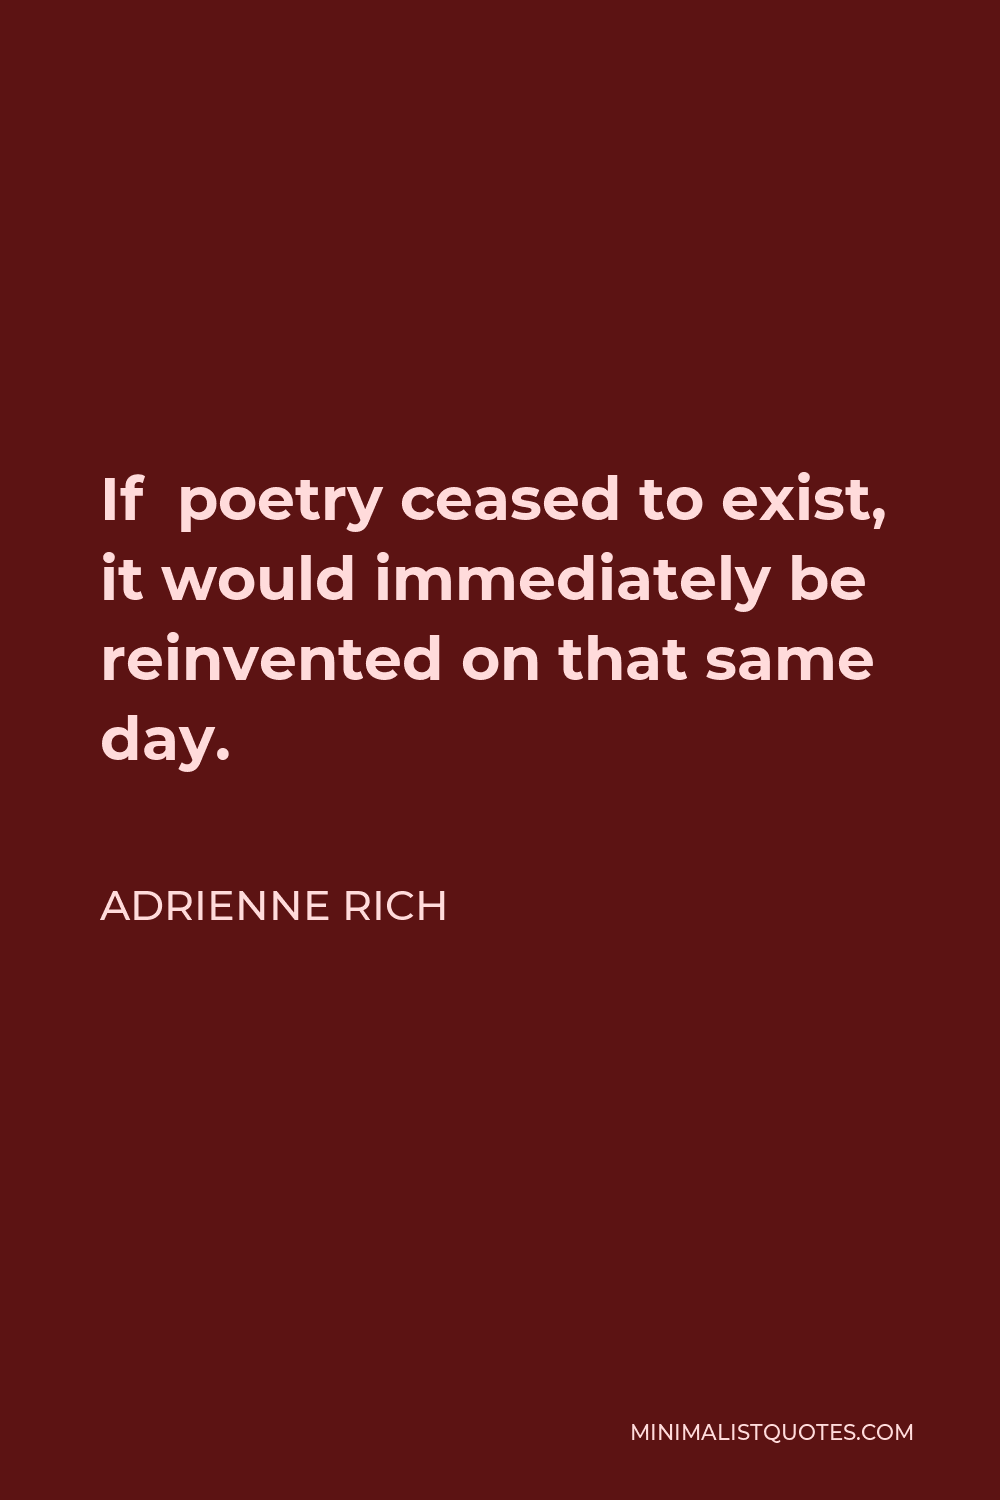 Adrienne Rich Quote - If poetry ceased to exist, it would immediately be reinvented on that same day.